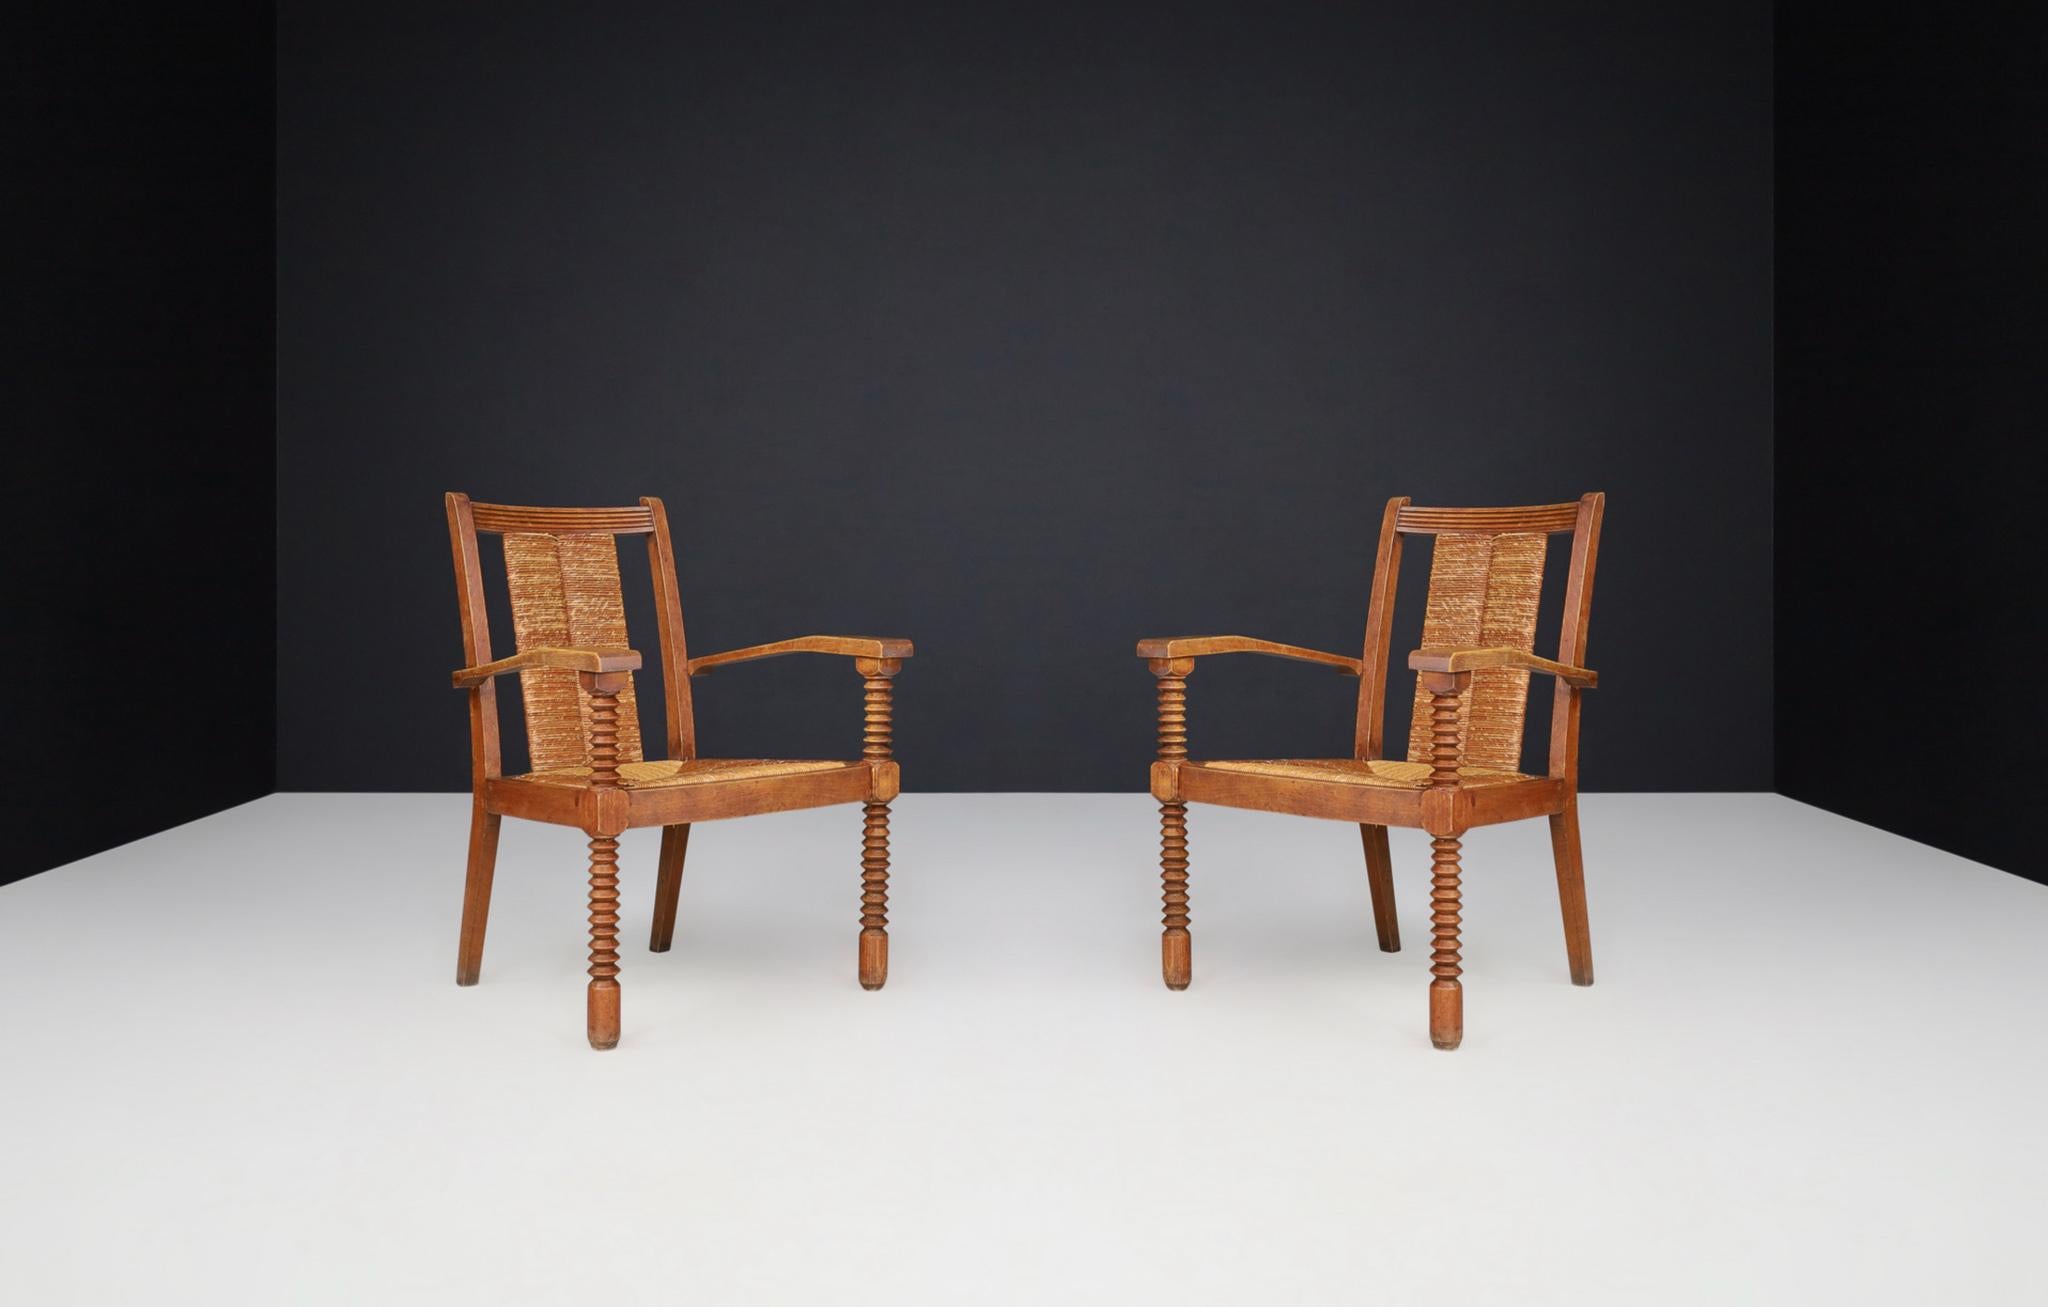 Art Deco armchairs in oak and rush, France, 1930s.

These gorgeous Art Deco armchairs were crafted in Normandy, France, circa 1930. Fantastic good original condition with a lovely patina. These chairs would be an eye-catching addition to any